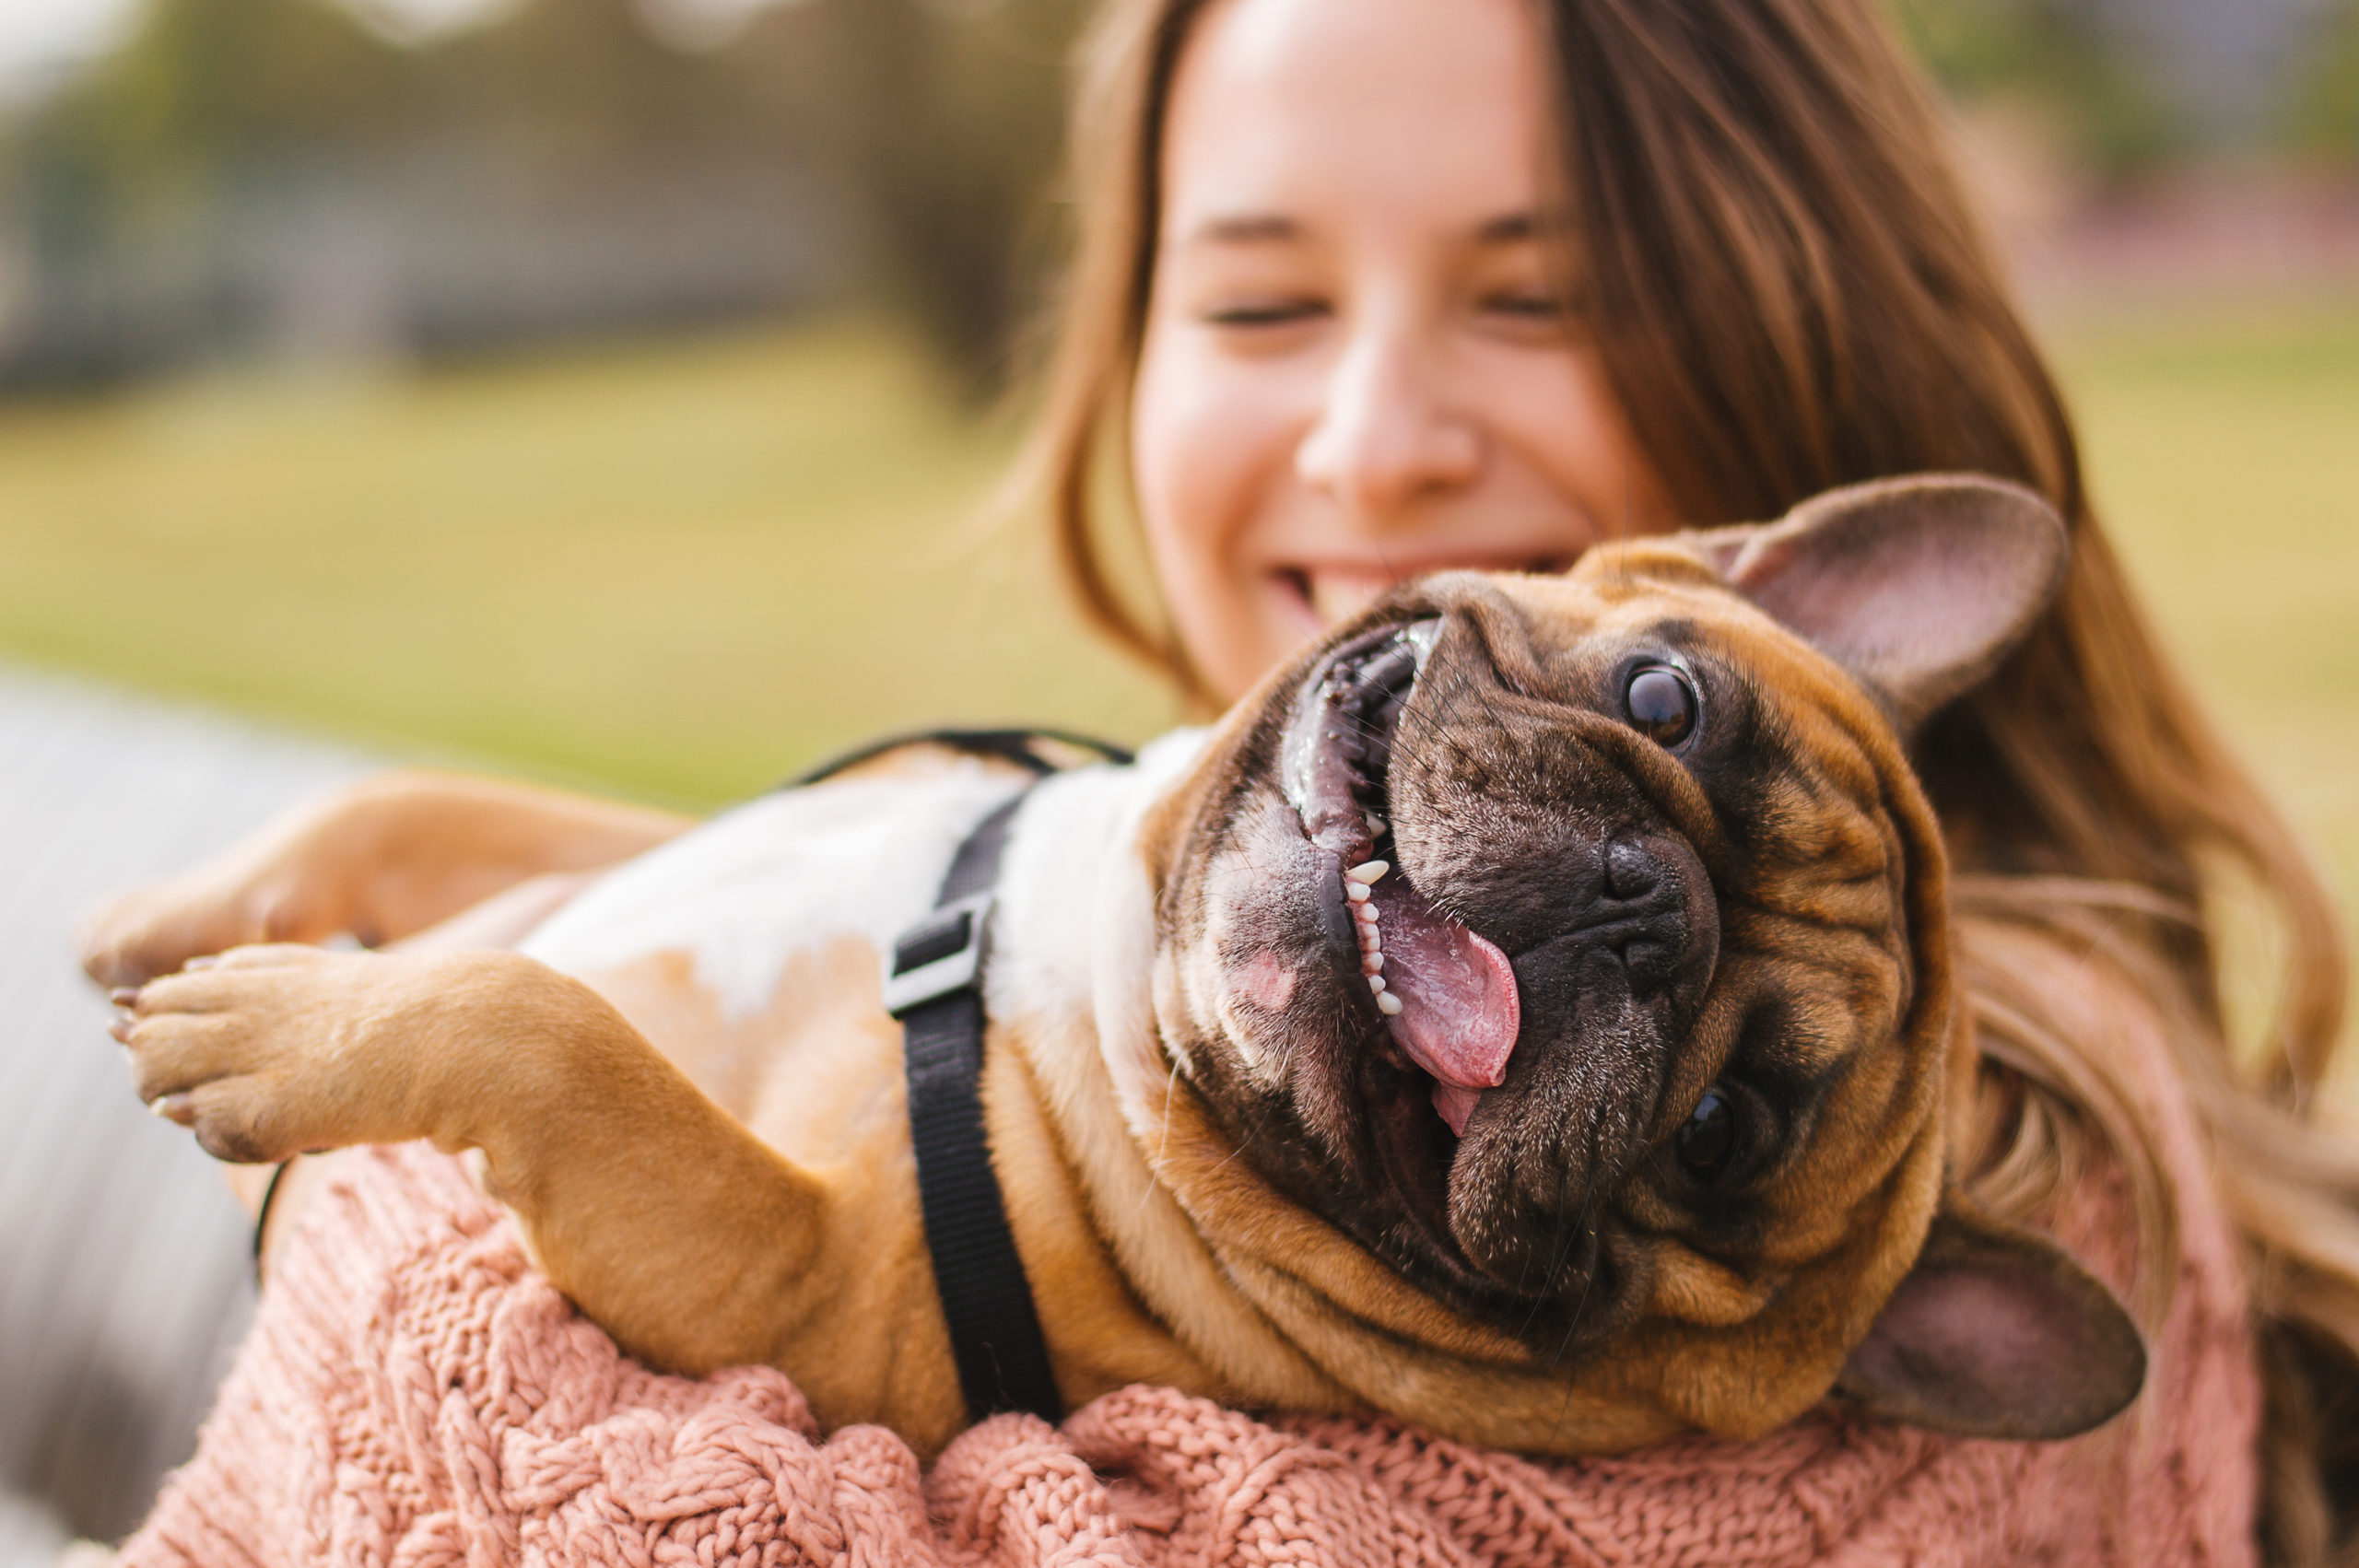 According to science, these are the signs that your dog really loves you